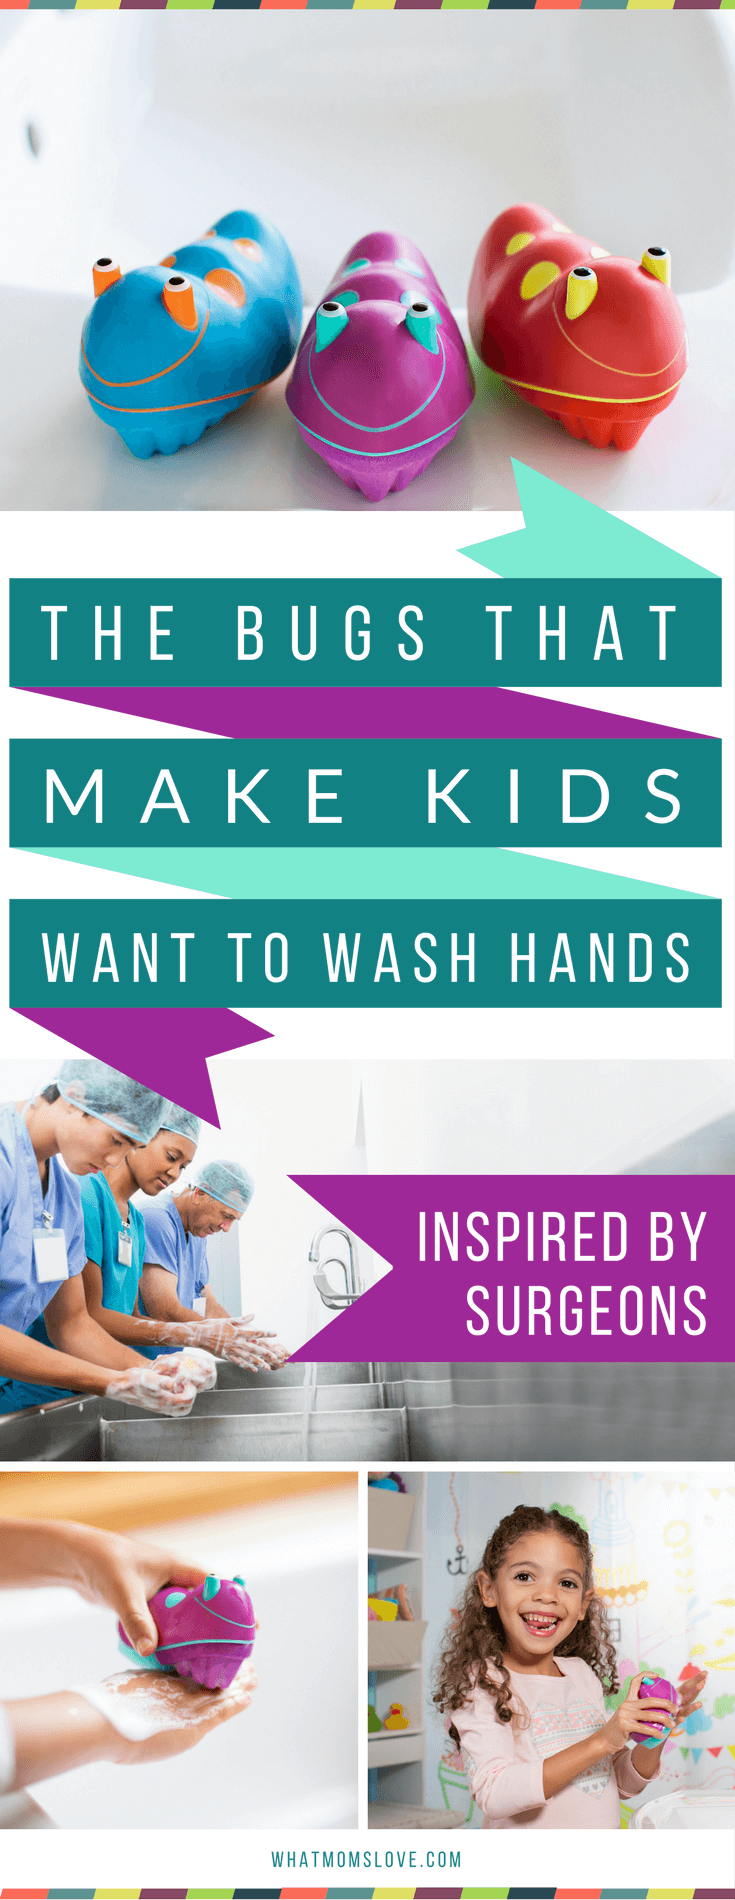 Scrub Bugs - keep your kids healthy all year round - especially during the winter, flu and cold season! These Scrub Bugs are 3 times more effective, and a fun way to get kids to wash their hands - keeping them healthy, instead of sick - hurrah! Learn more and get an exclusive promo code at whatmomslove.com